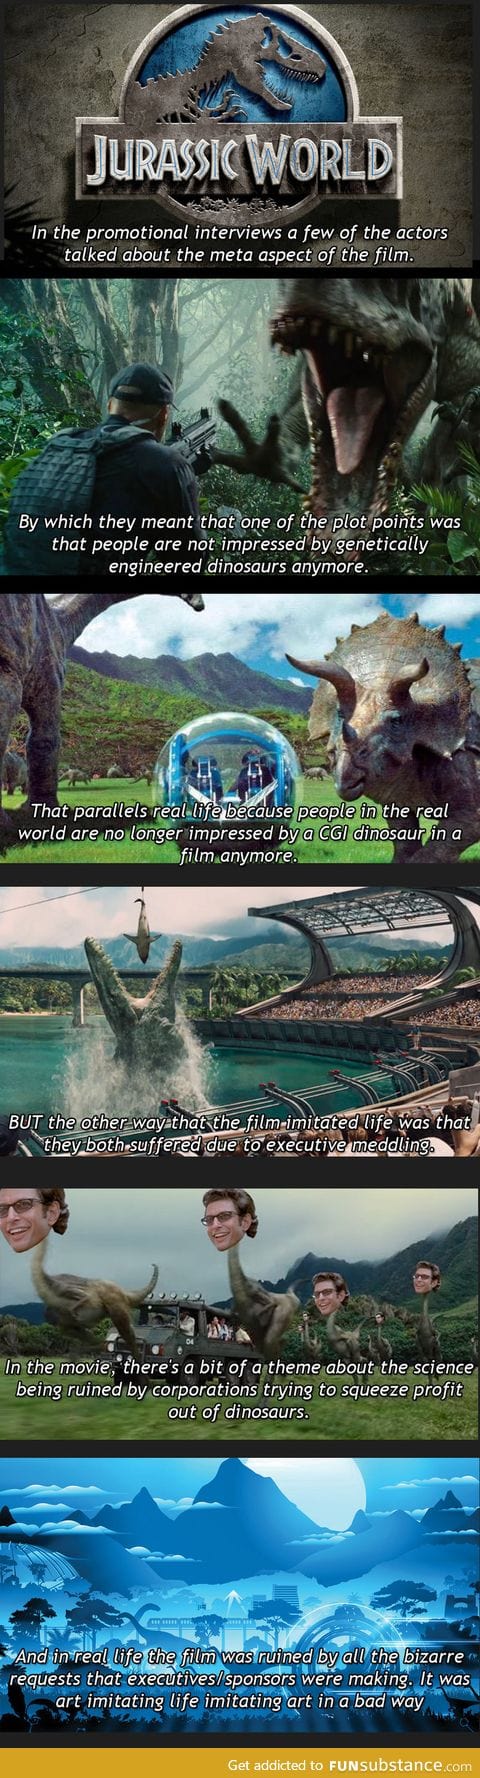 The irony about Jurassic World you have to read